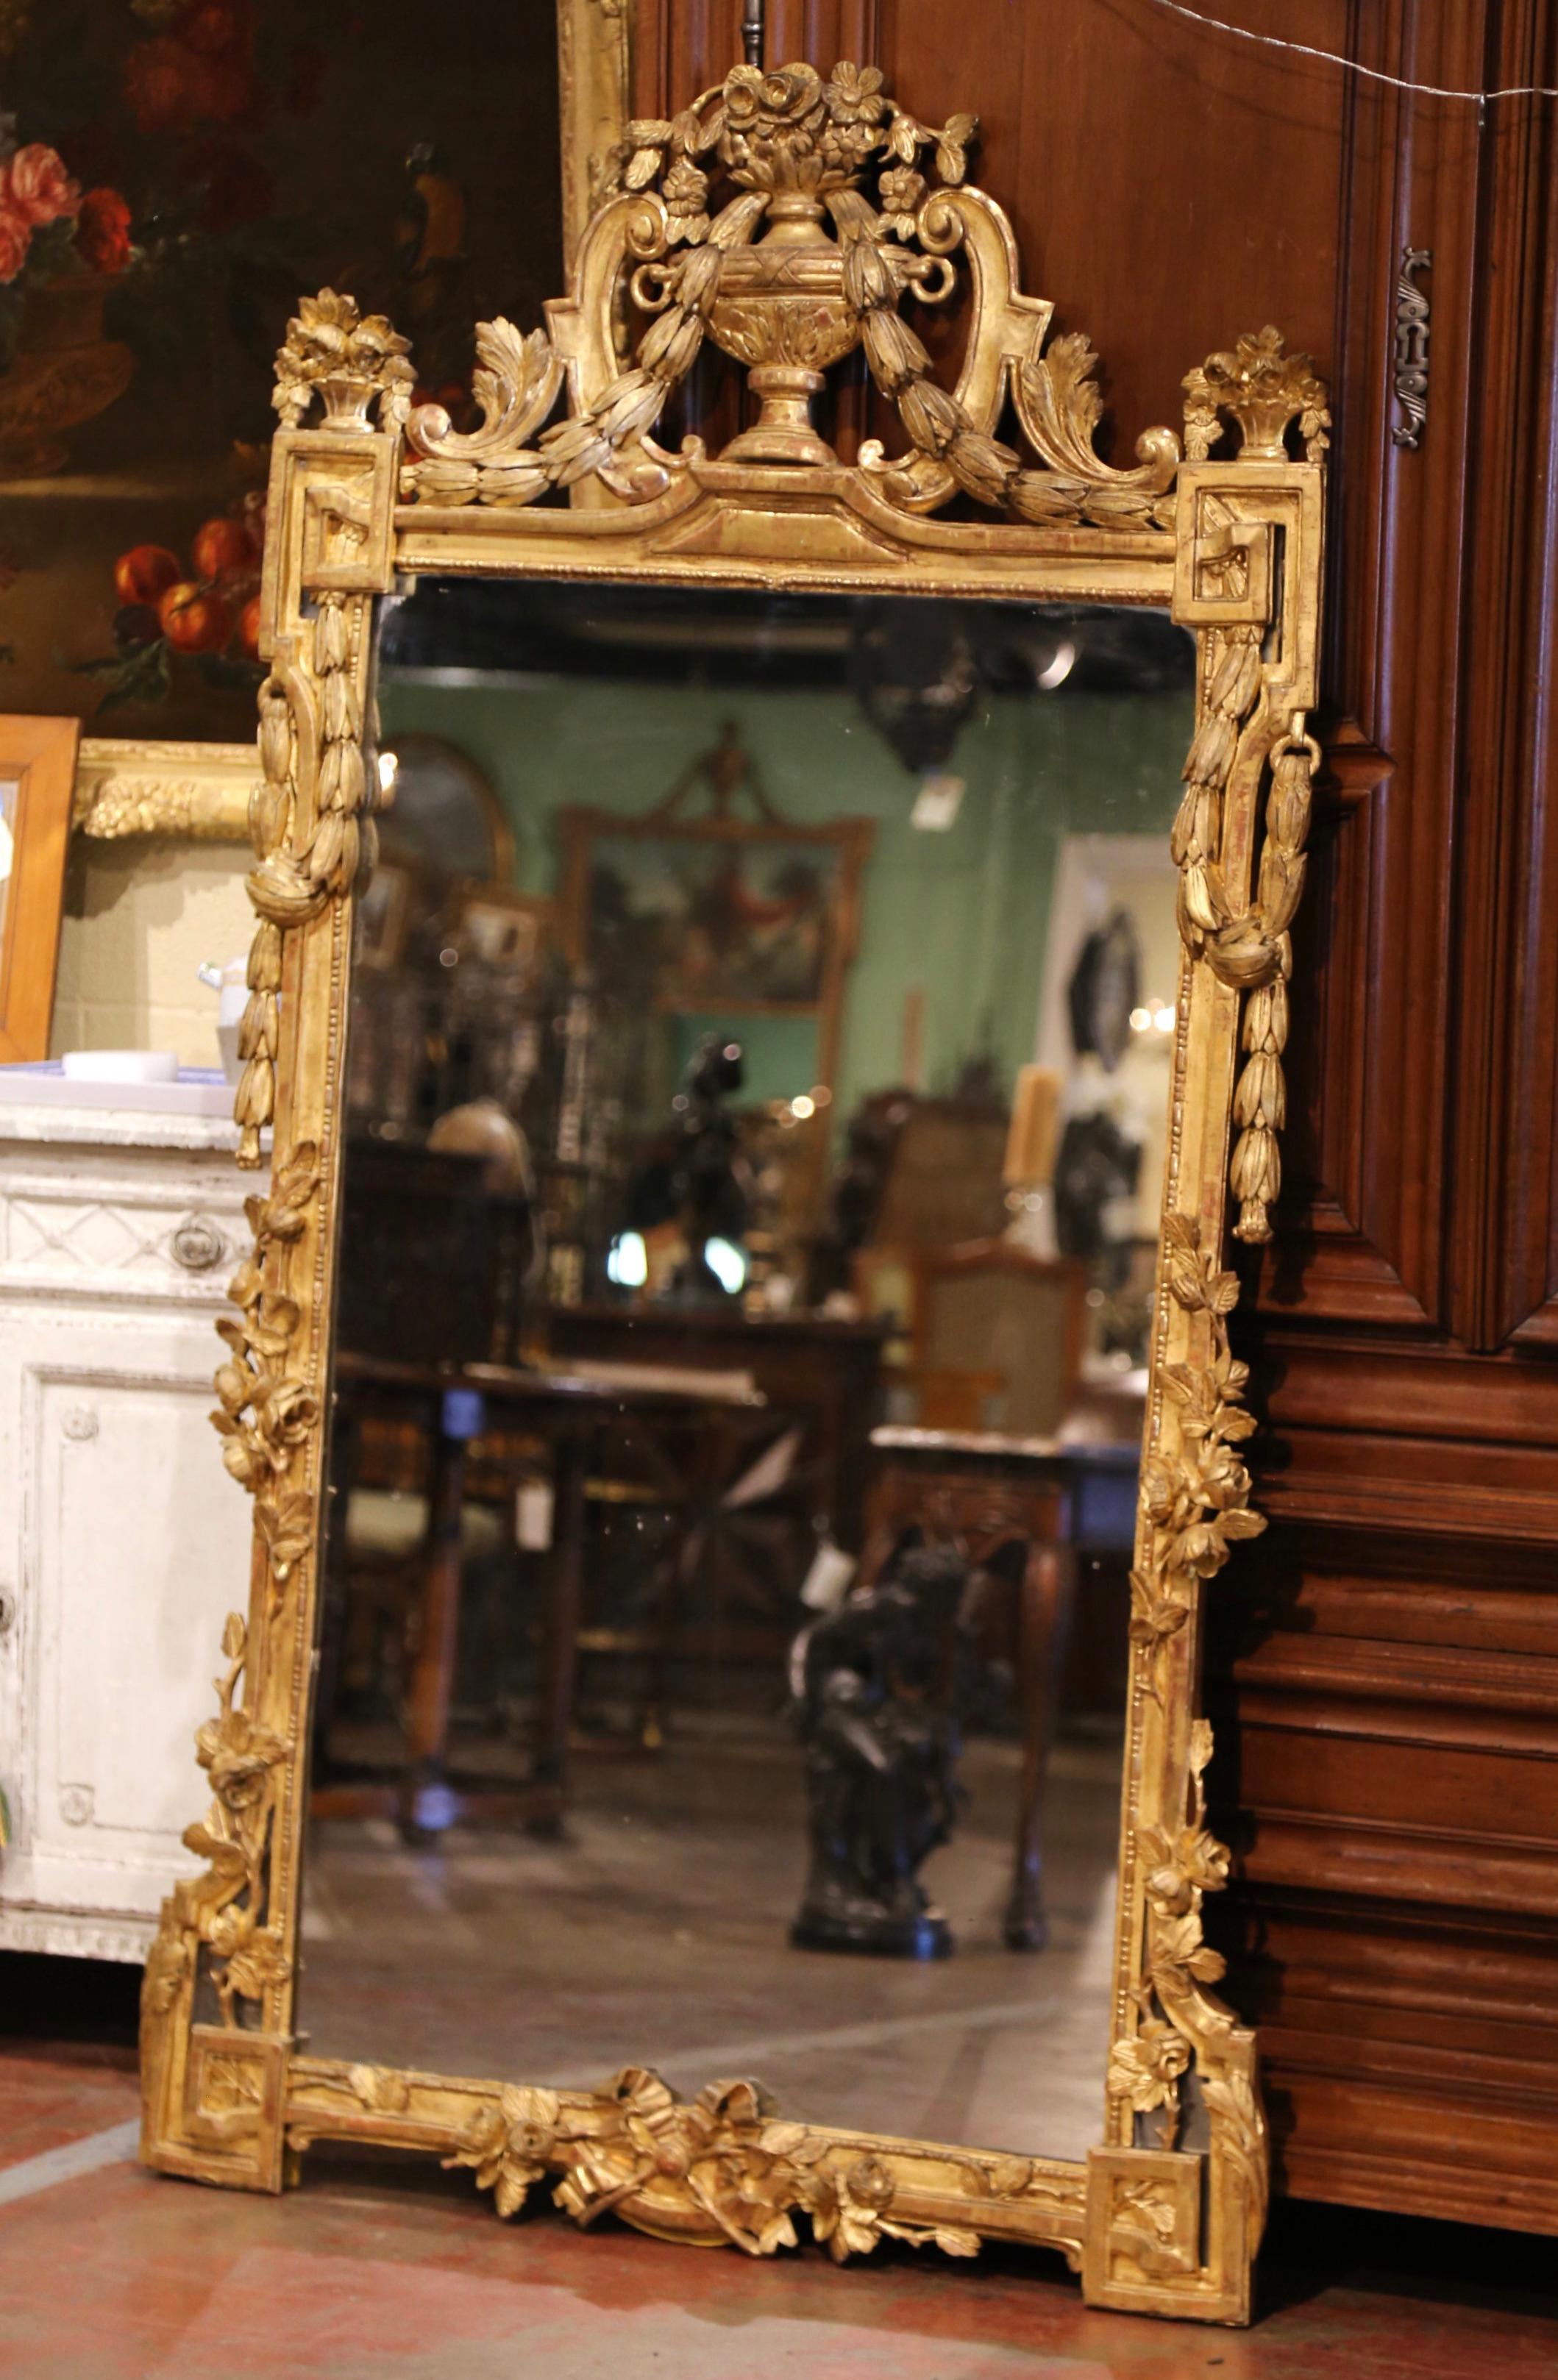 This important antique gilt mirror was crafted in Paris, France, circa 1780. The tall wall decor features a large cartouche at the pediment decorated with carved center vase, flanked with floral and swag motifs at the ends. Both sides are